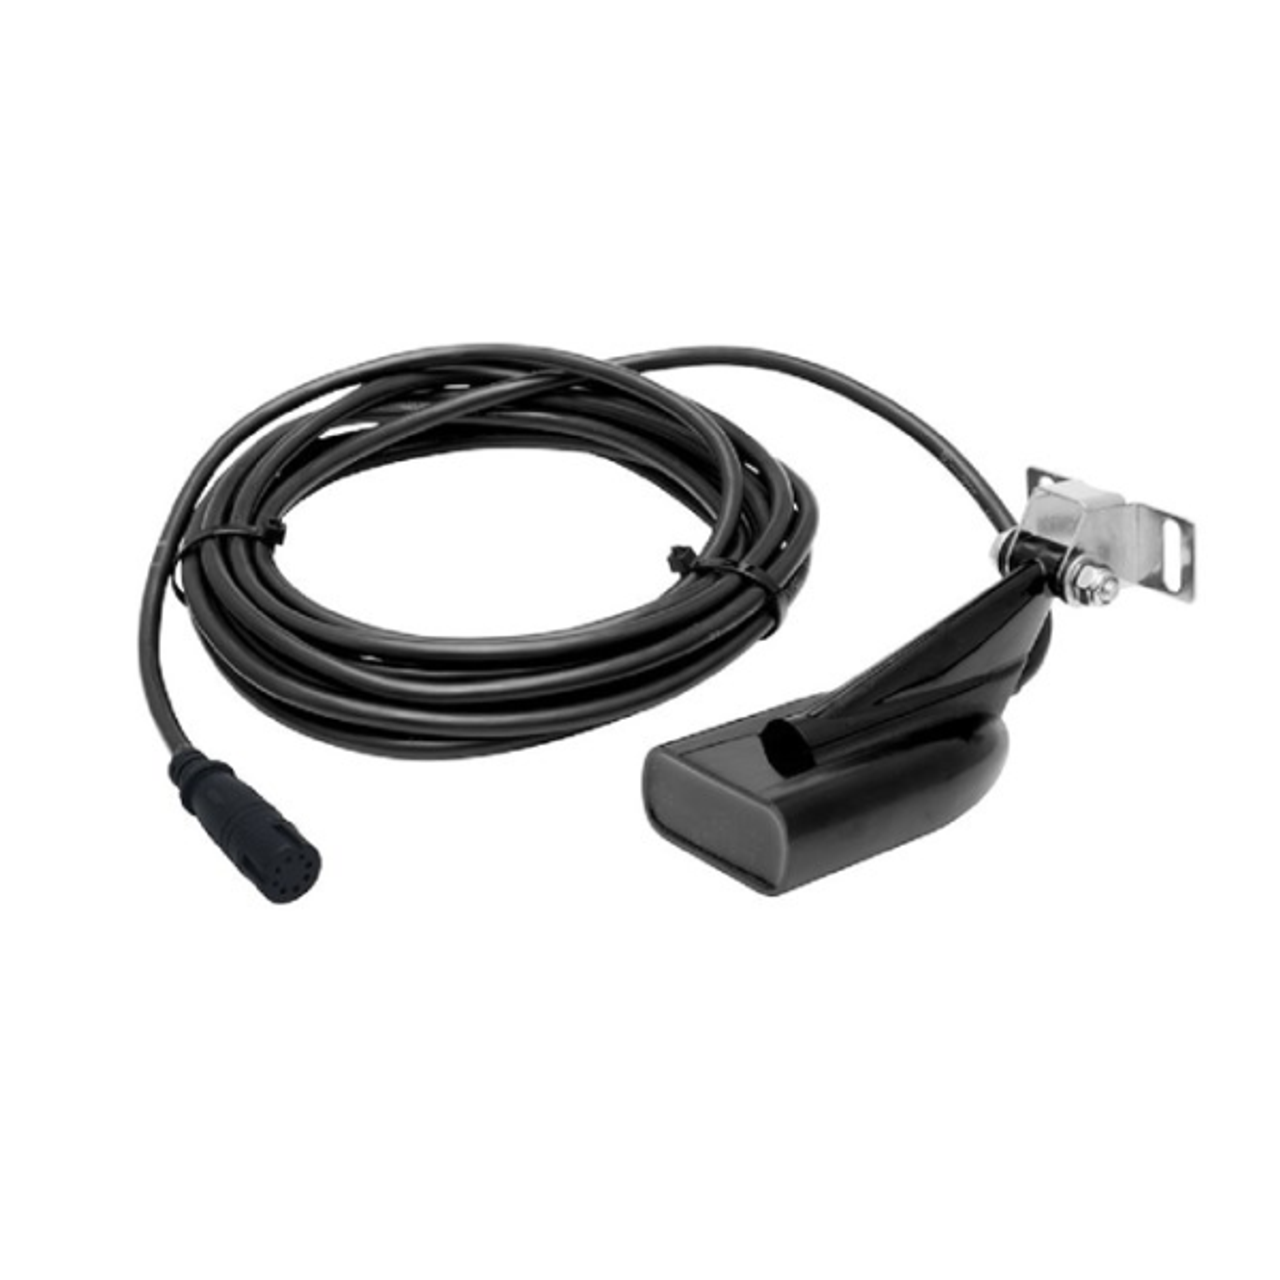 Lowrance HOOK2 / Reveal 83/200 HDI Transducer (000-15640-001)